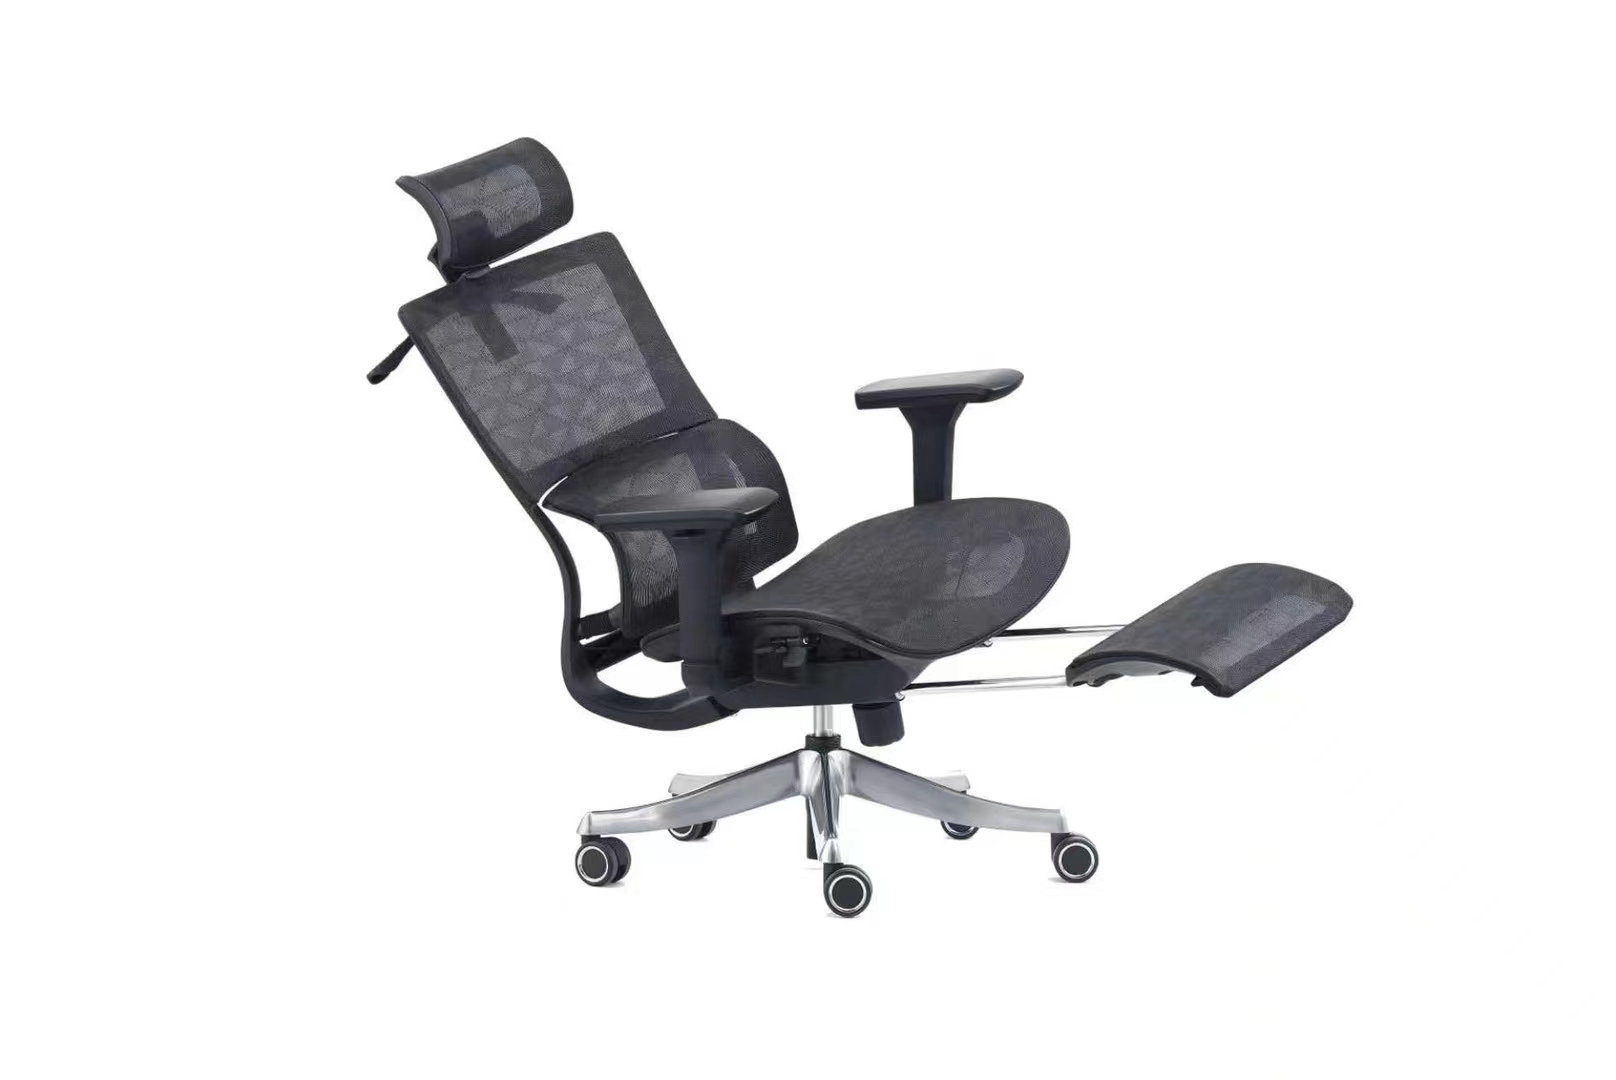 Correct posture and benefits of using an ergonomic chair